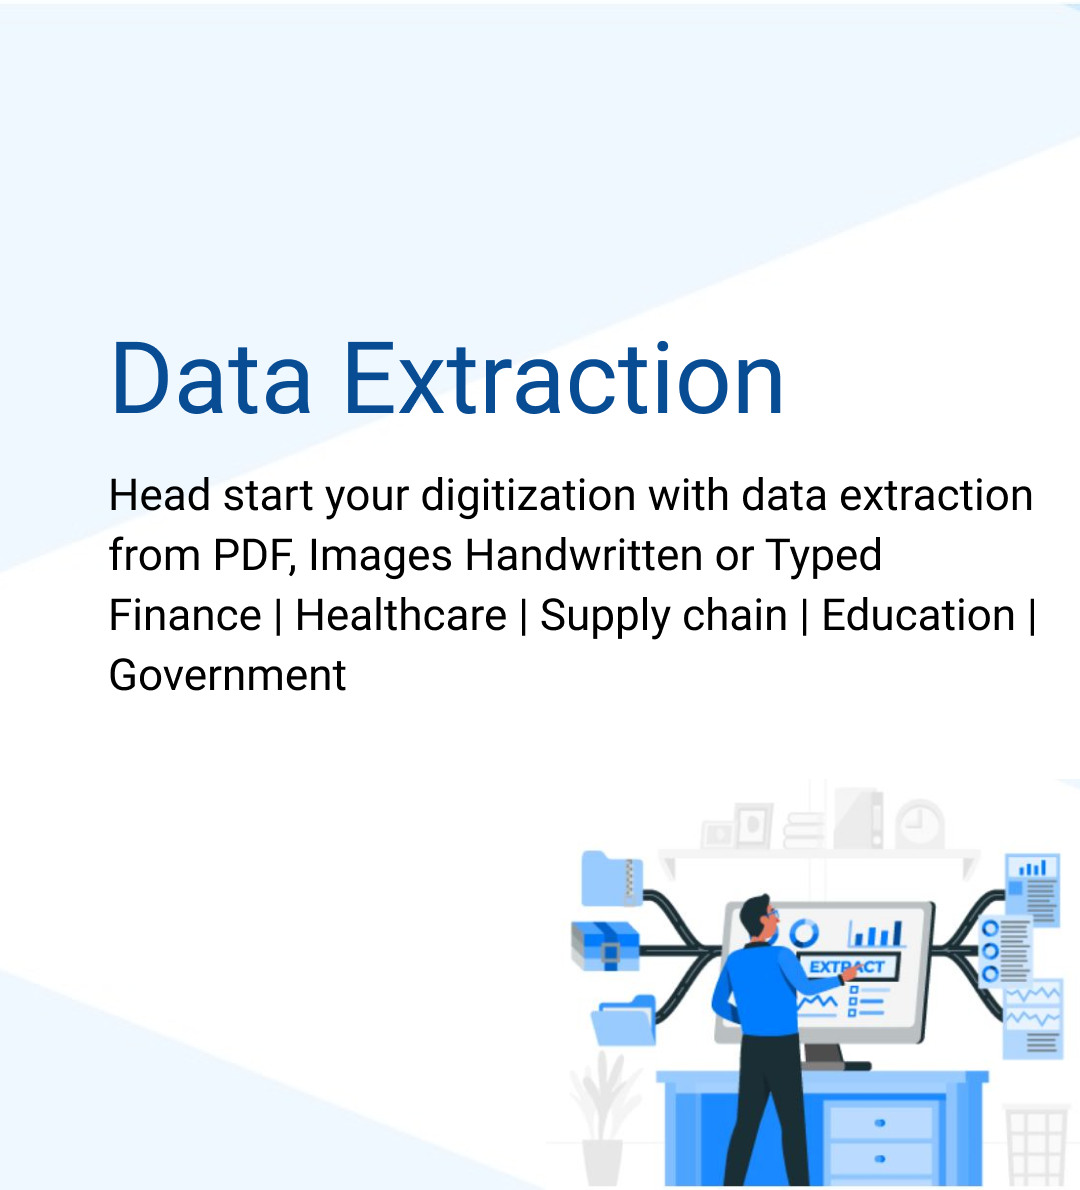 Head start your Digitalization with data extraction from PDFs, Images.Both typed and handwritten